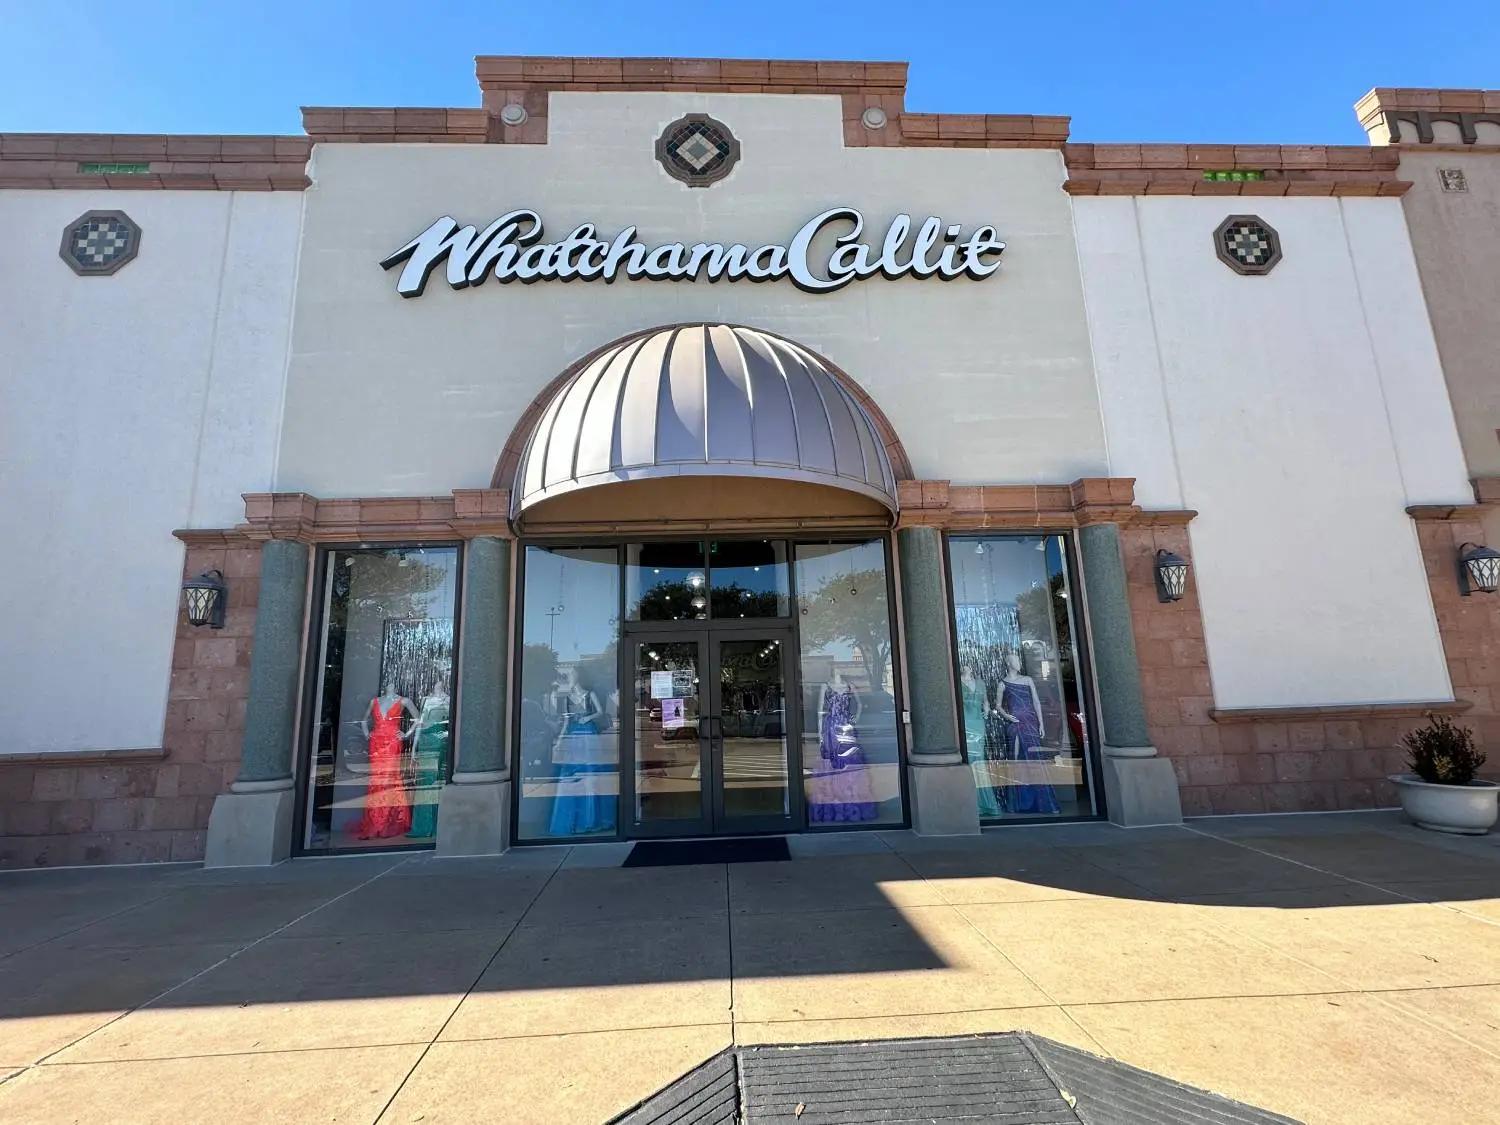 WhatchamaCallit: Dallas and Fort Worth's Premier Prom, Pageant, Evening, and  Homecoming Dress Store